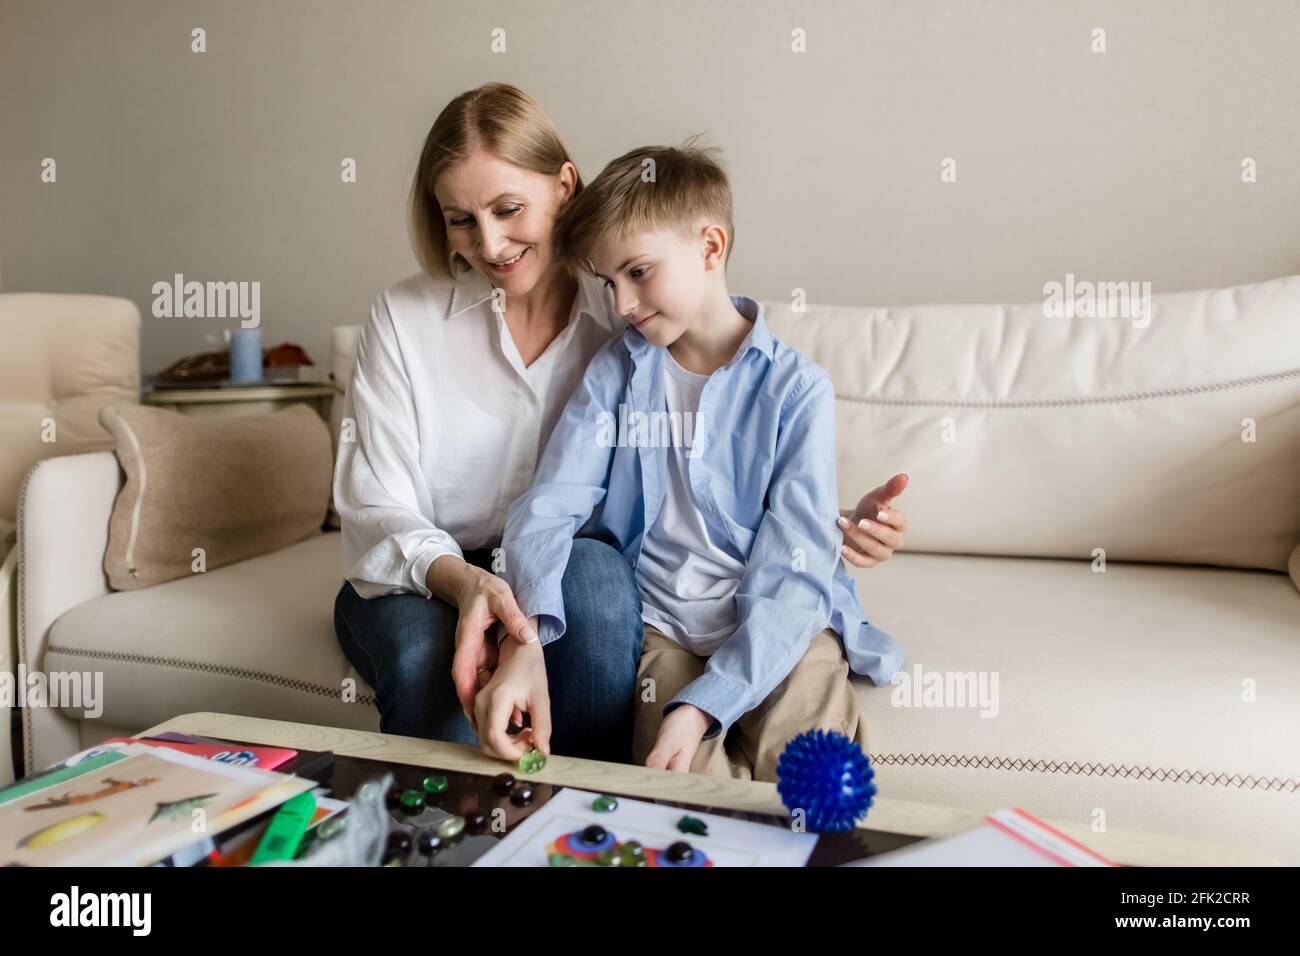 Adult woman and a teenager are sitting behind on the couch playing a board game. Stock Photo